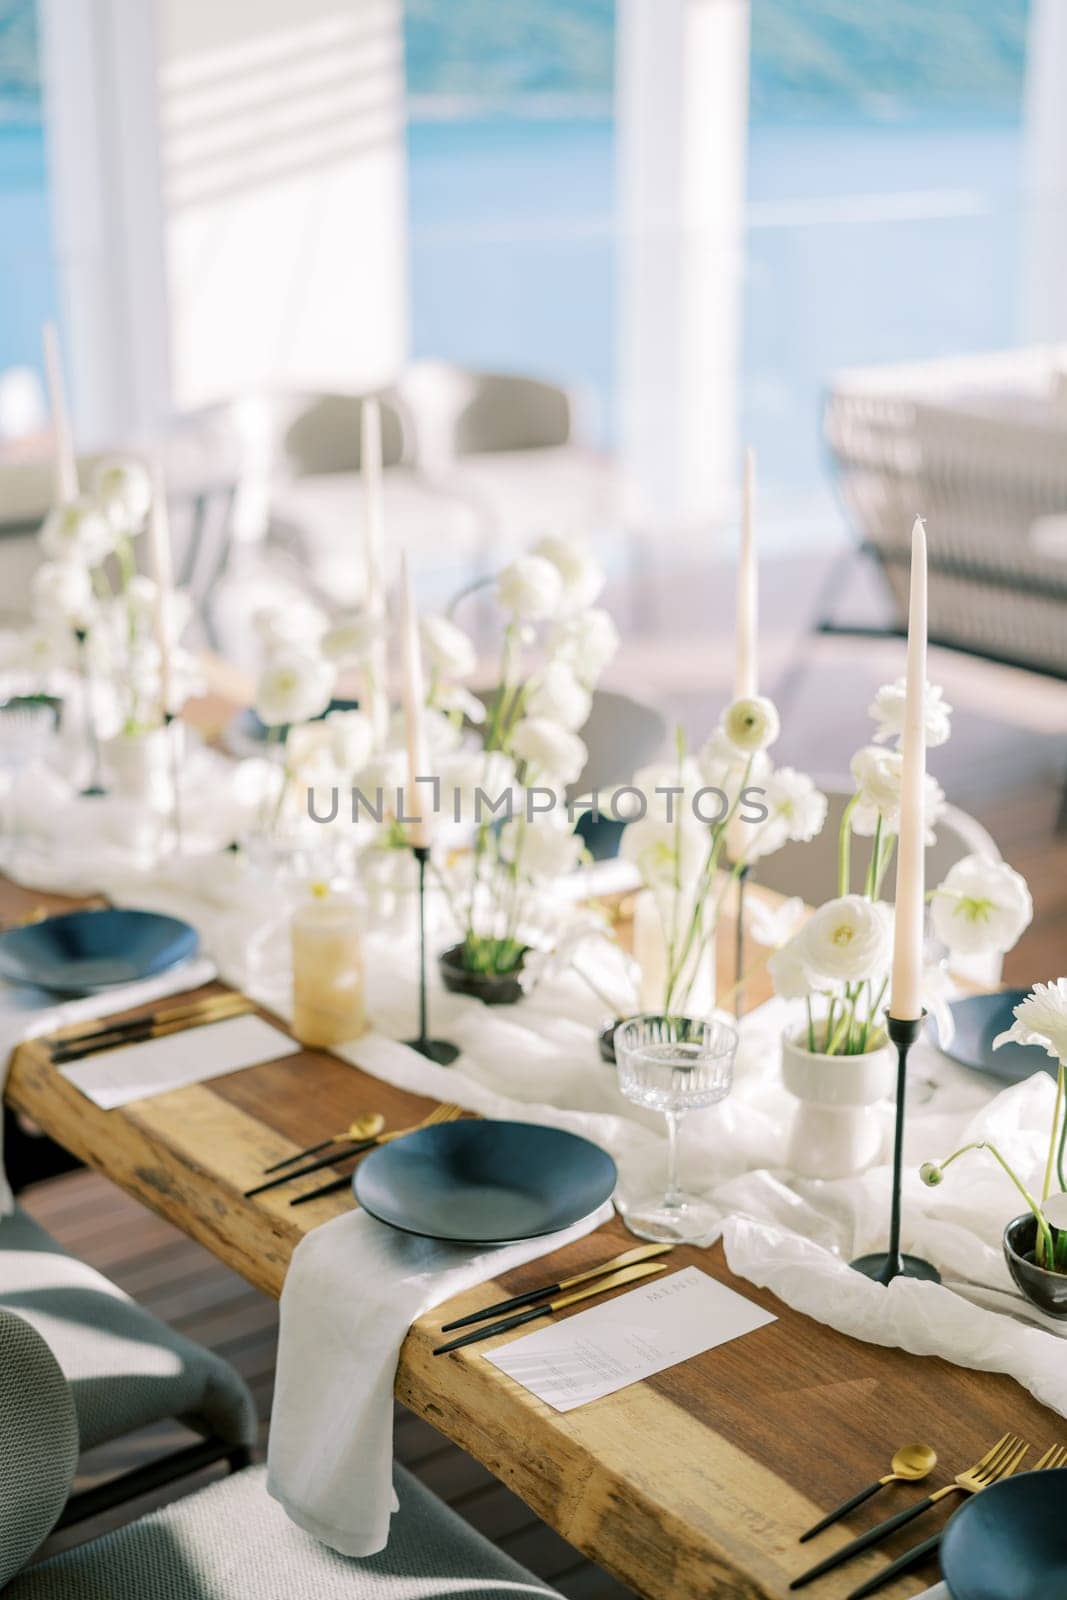 Black plates on white napkins stand next to gold cutlery and menus on a holiday table with white flowers. High quality photo